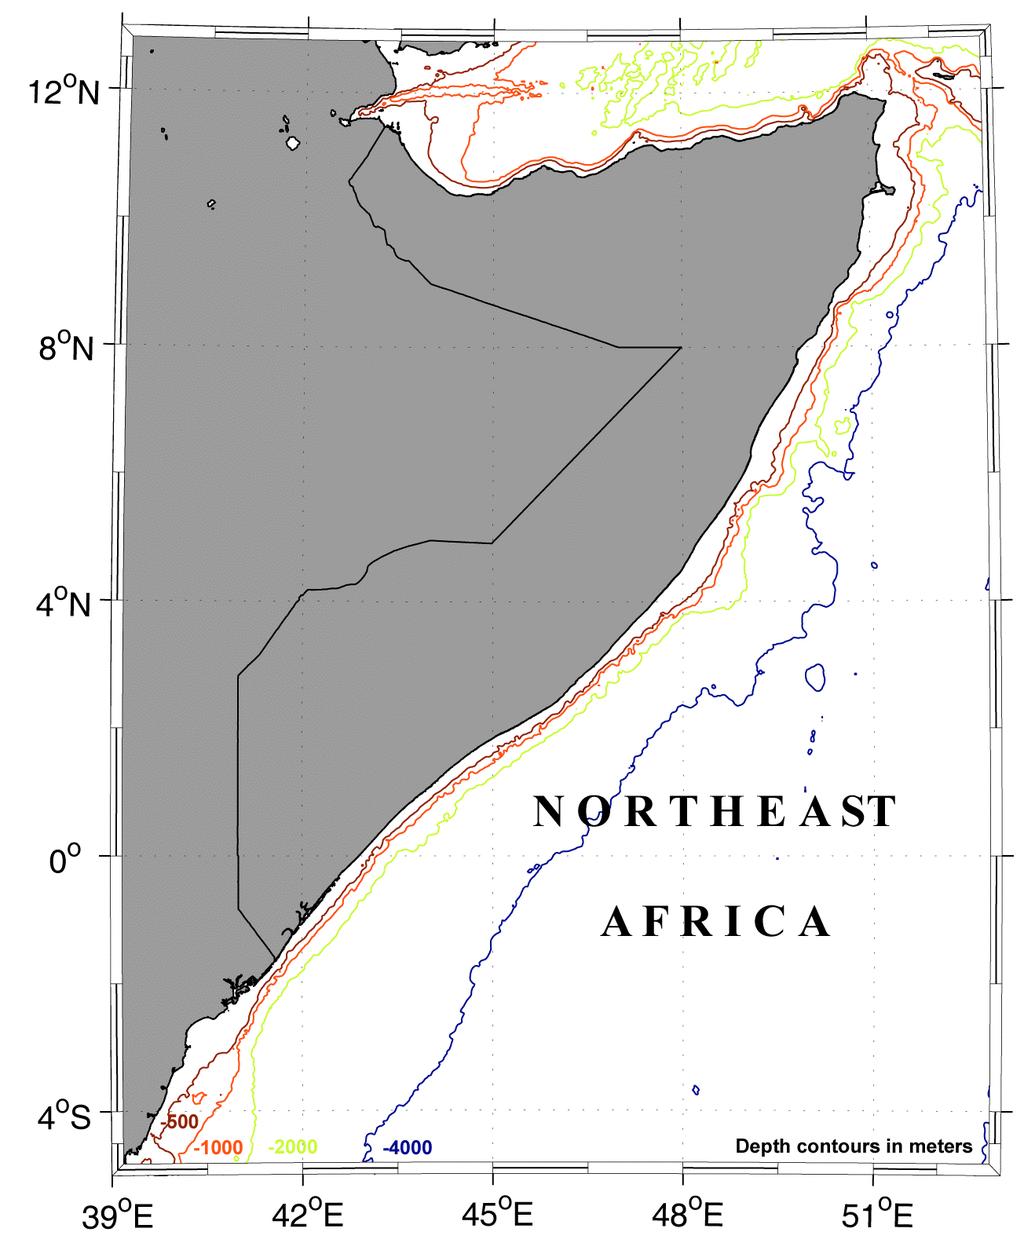 Overview covers approximately 2200 km of coast from Kenya to the tip of Somalia (approximately 39 o E, 4 o S to 51 o E, 12 o N)(Figure 1).